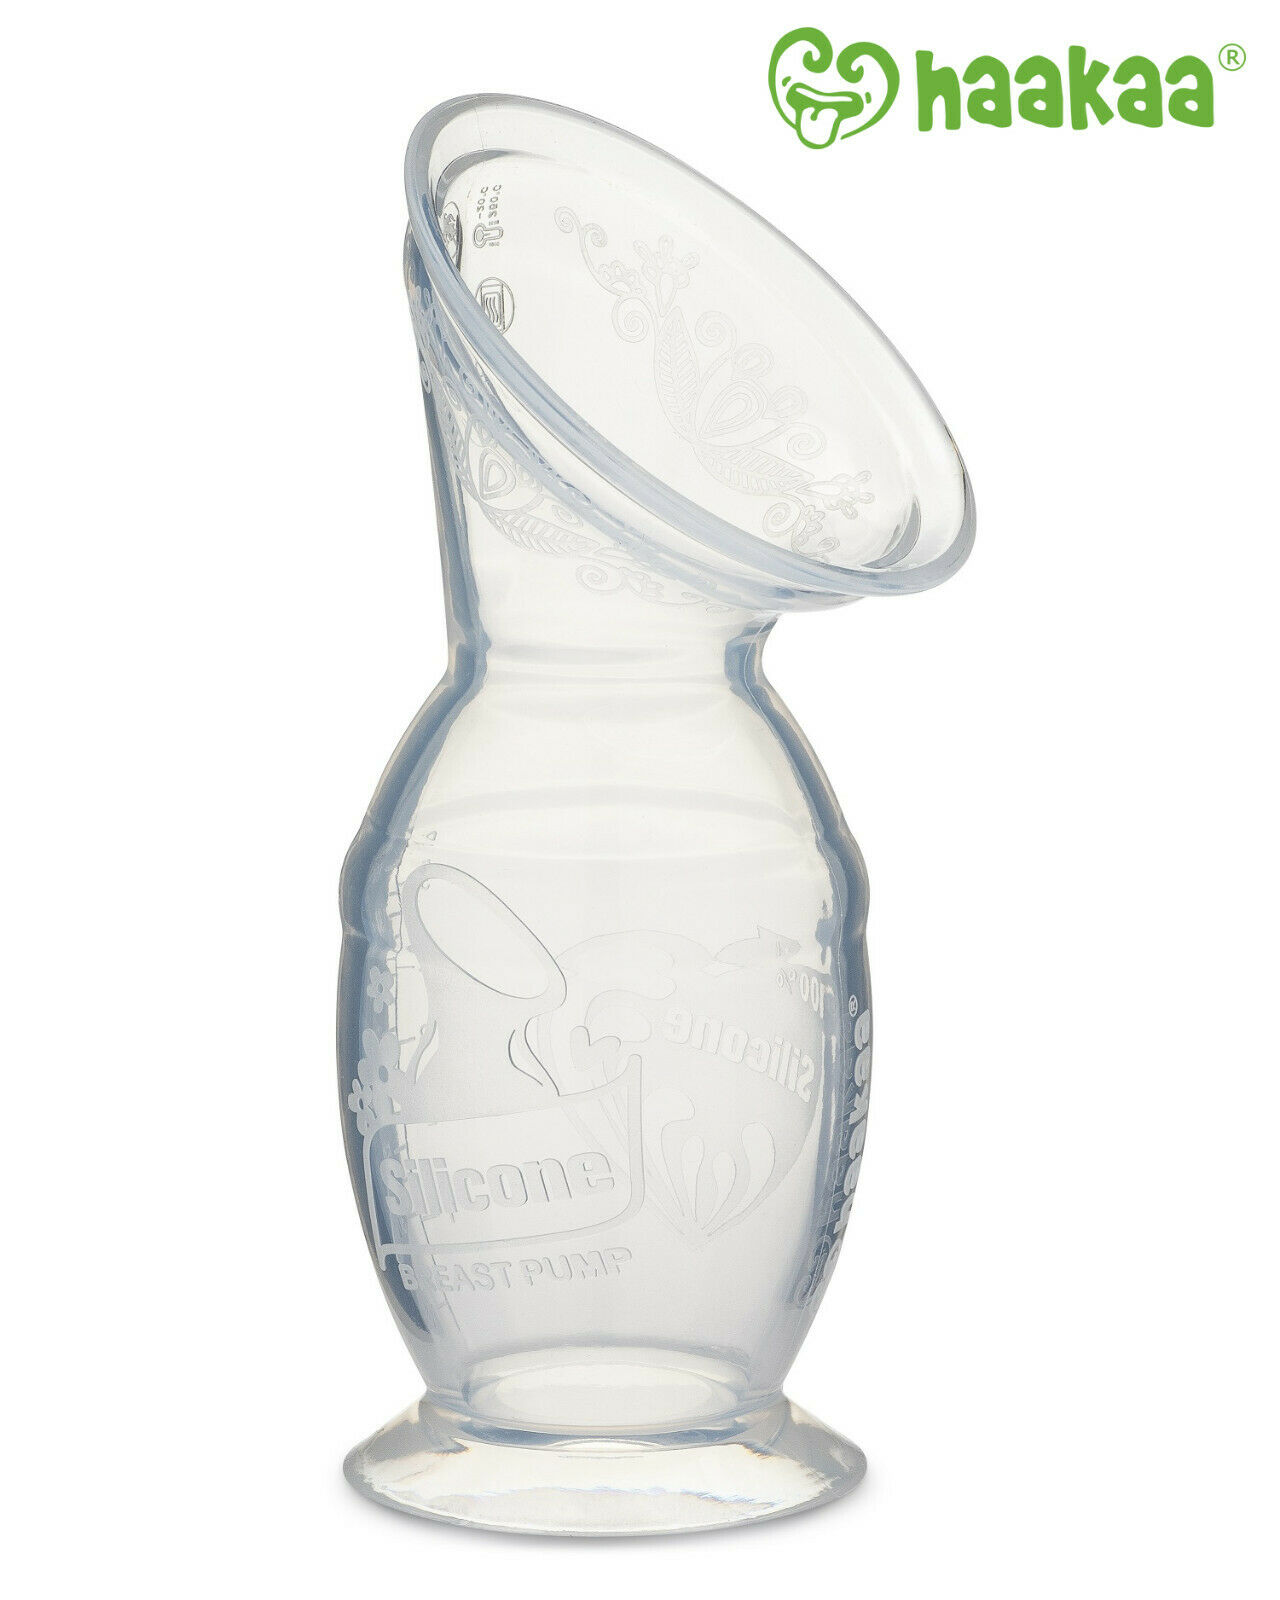 Haakaa GEN. 2 Silicone Breast Pump 5 oz/150 ml, 2019 Model, Sold by Distributor